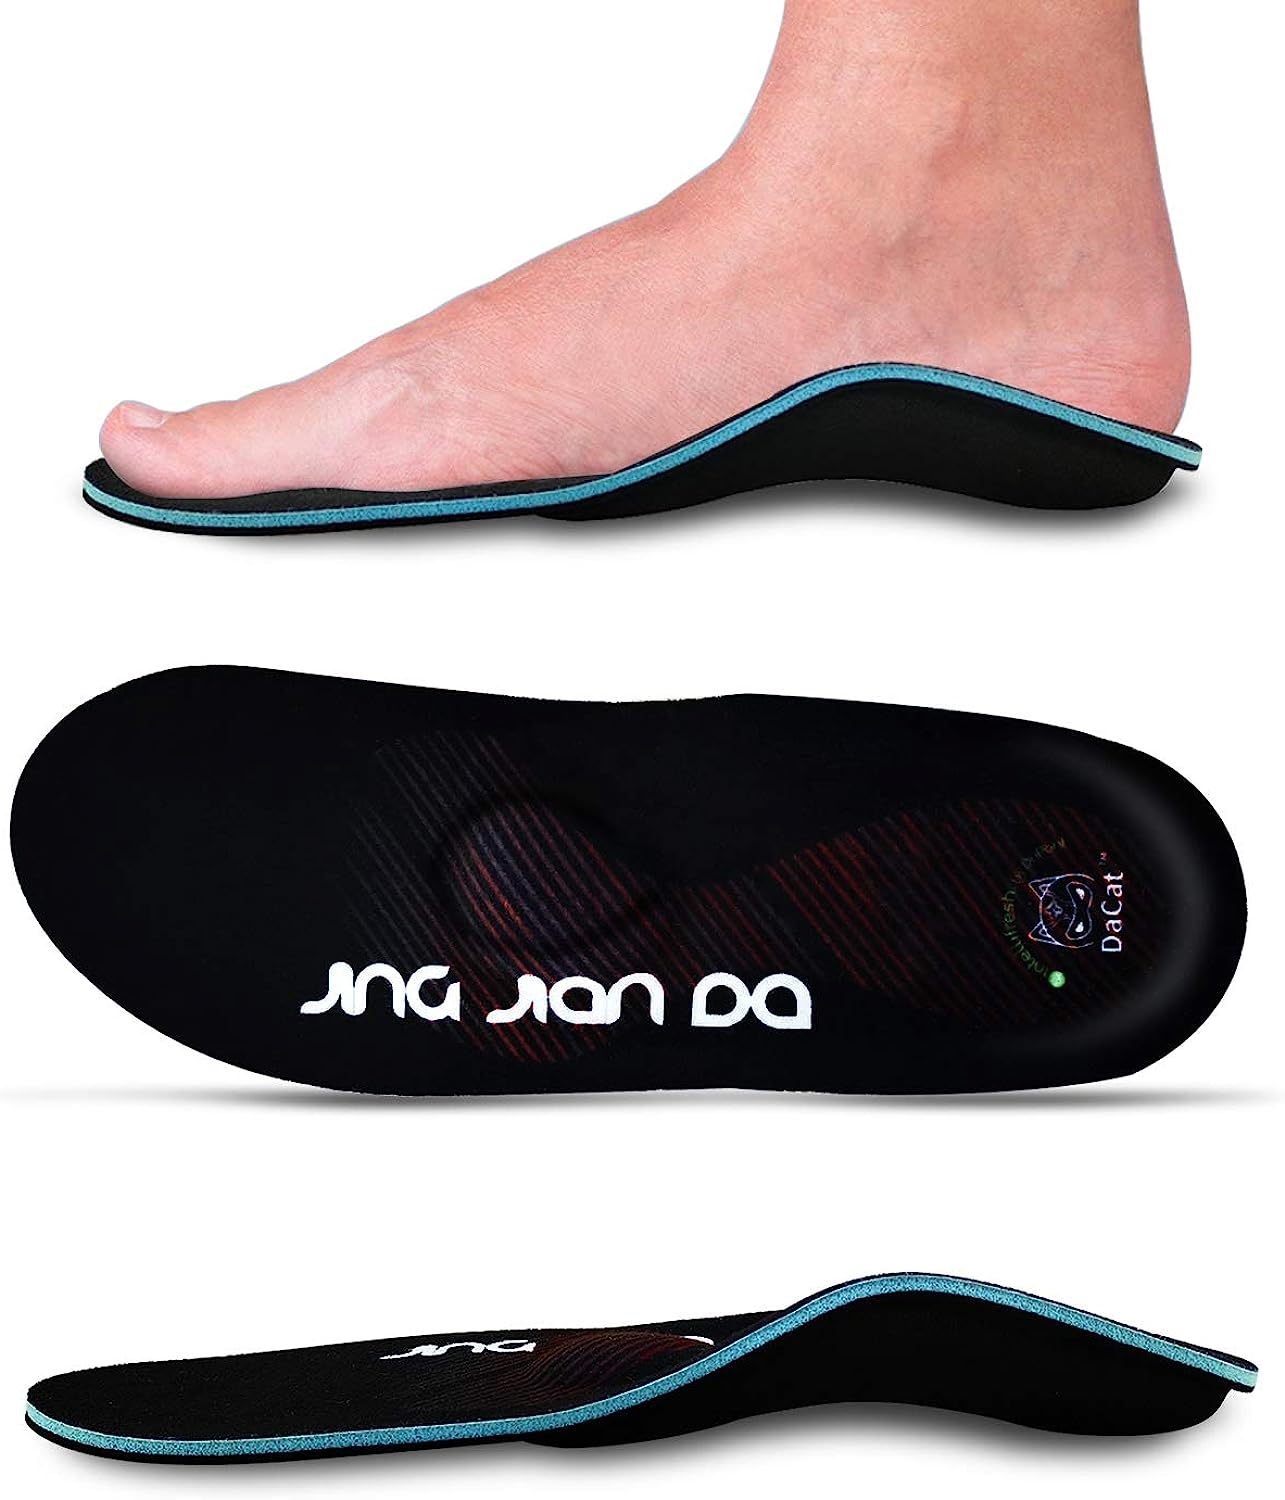 Severe Flat Feet Arch Support Insoles- Firm Arch [...]